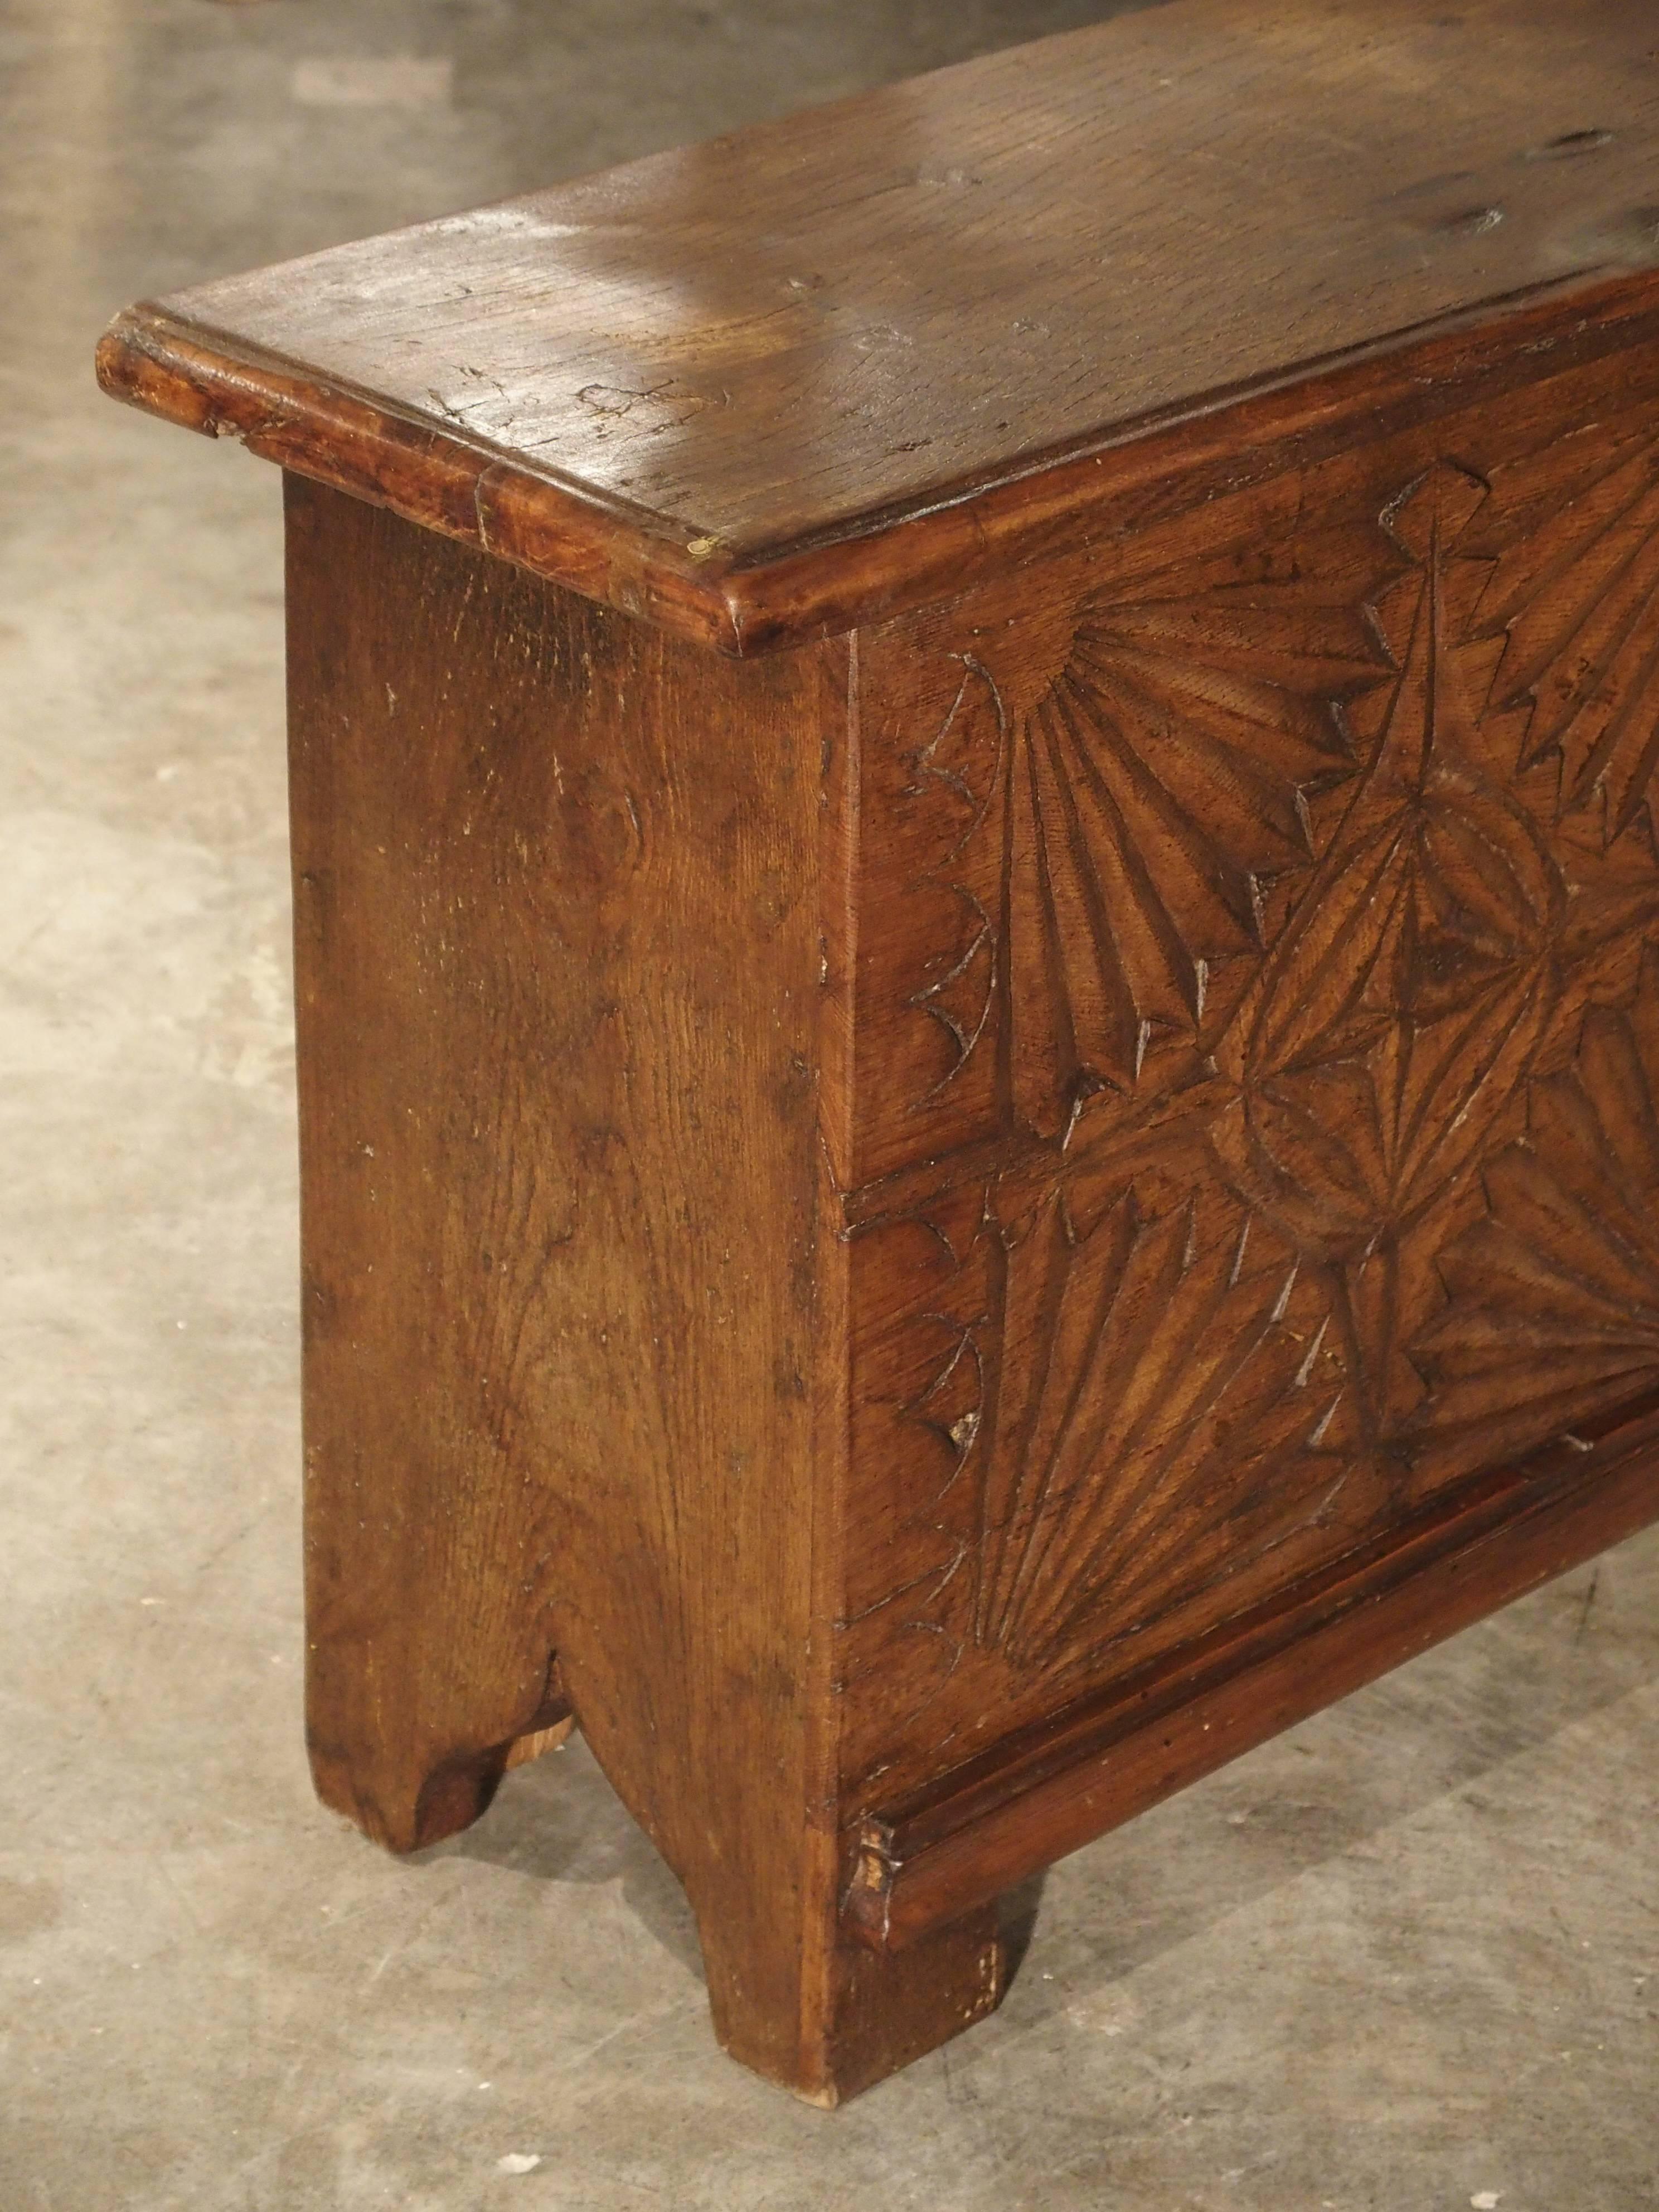 This shallow trunk from France has been constructed from French oak and has some antique elements. The front panel has two sections of four fan shaped motifs. At the centre is a stylized quatrefoil inside a carved circle. The centre panel has the